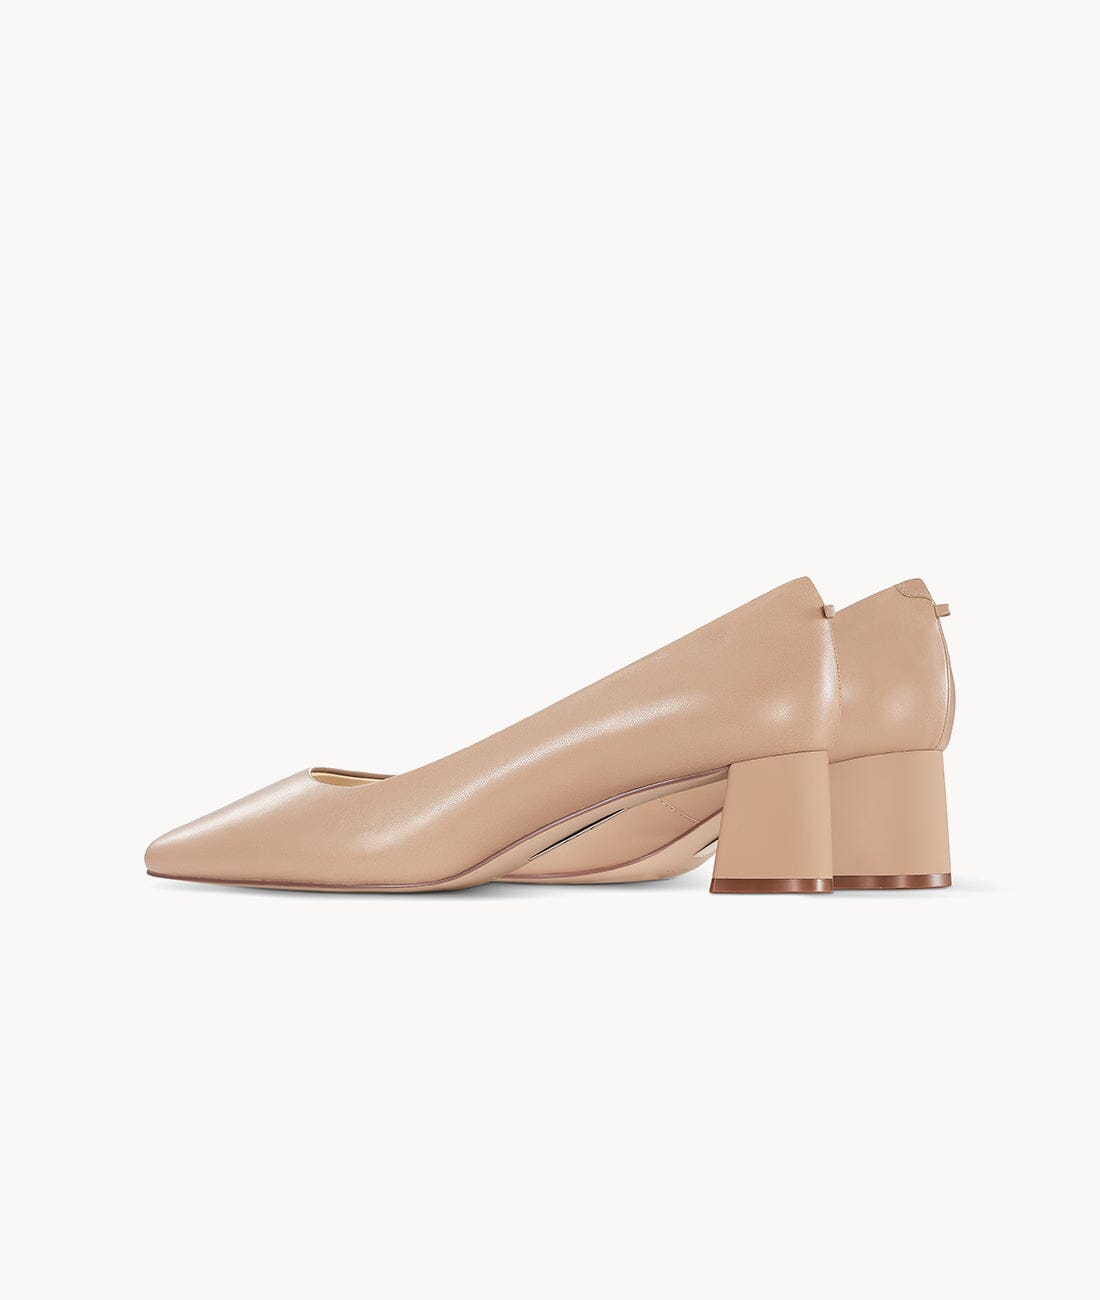 7or9 - Almond - Pumps